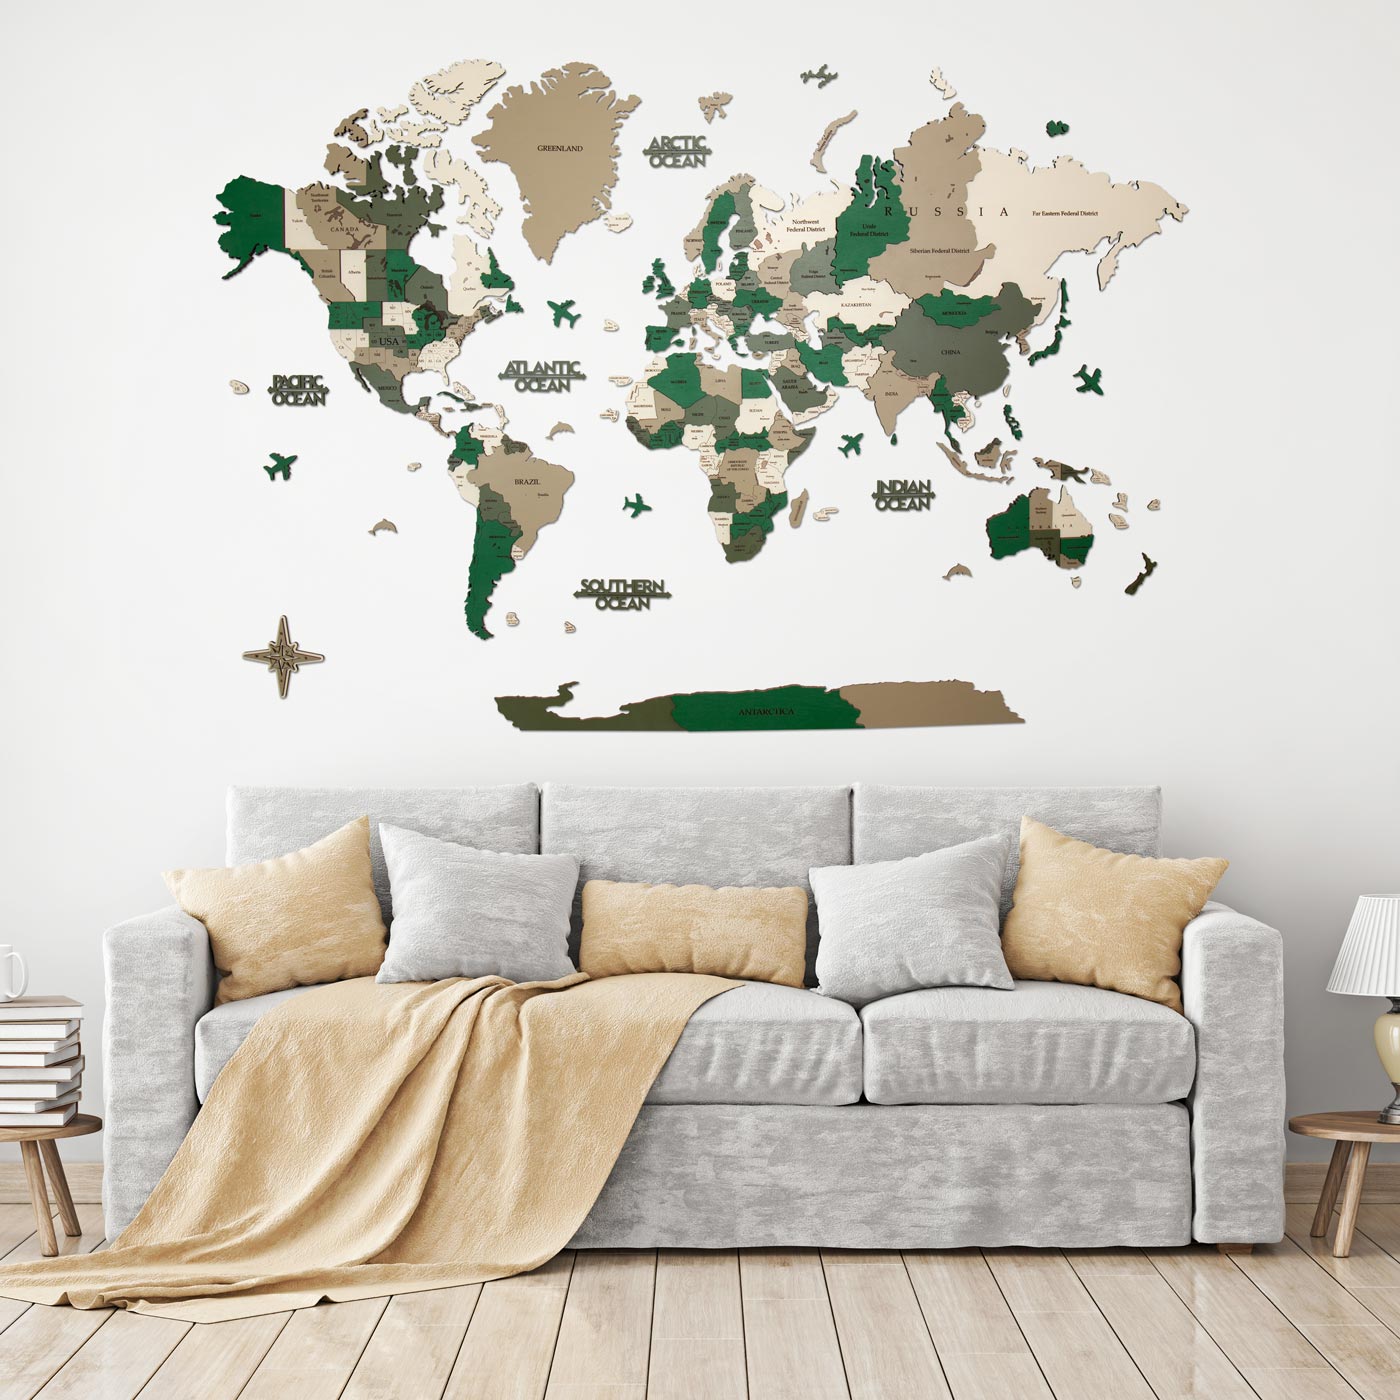 3d wooden world map. Wall wooden decor. Сamouflage colors by Ksilart